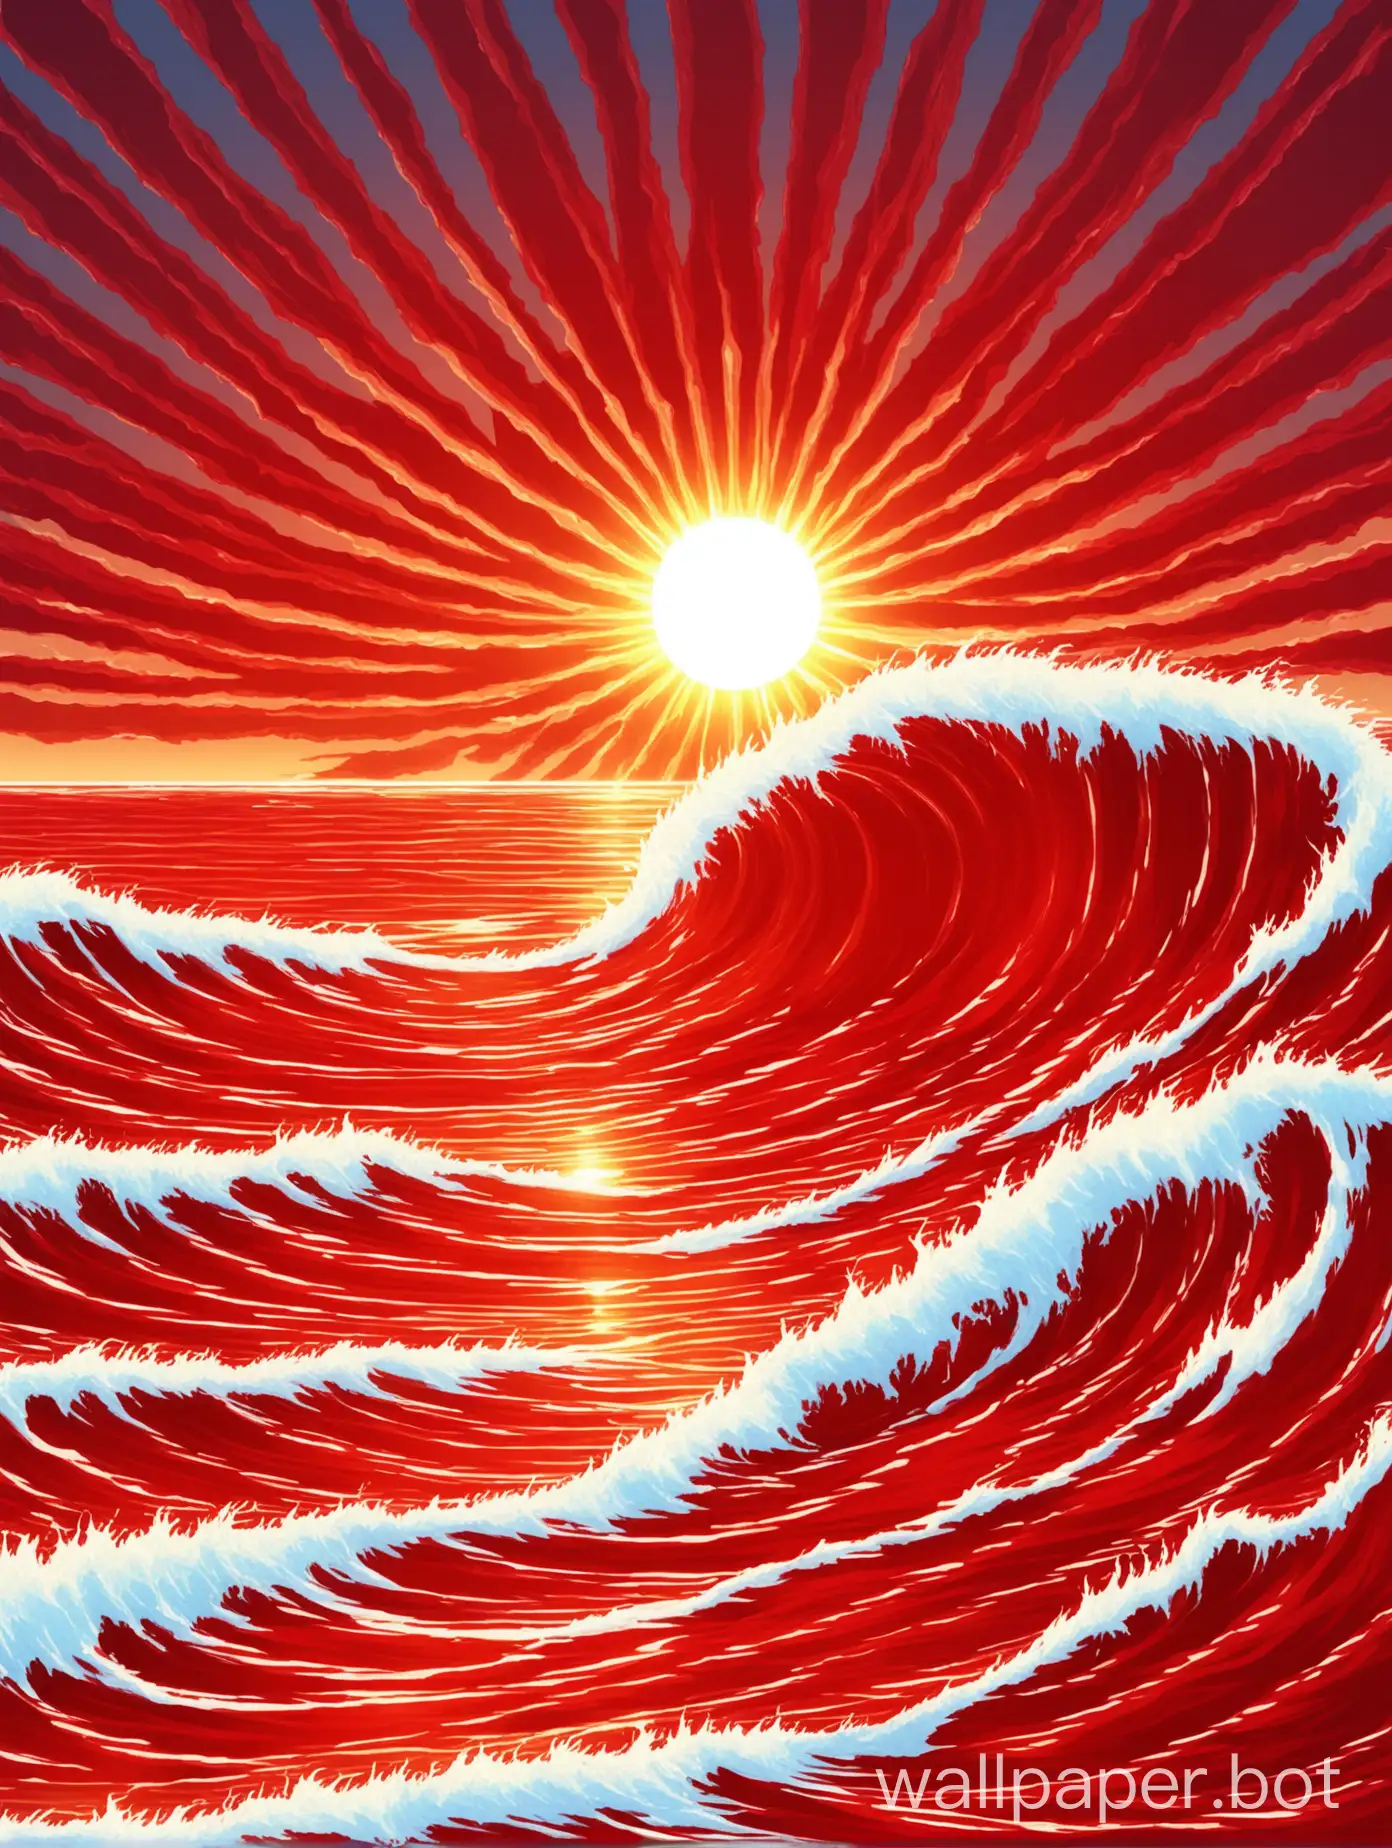 Vibrant-Red-Wave-Under-the-Glowing-Sun